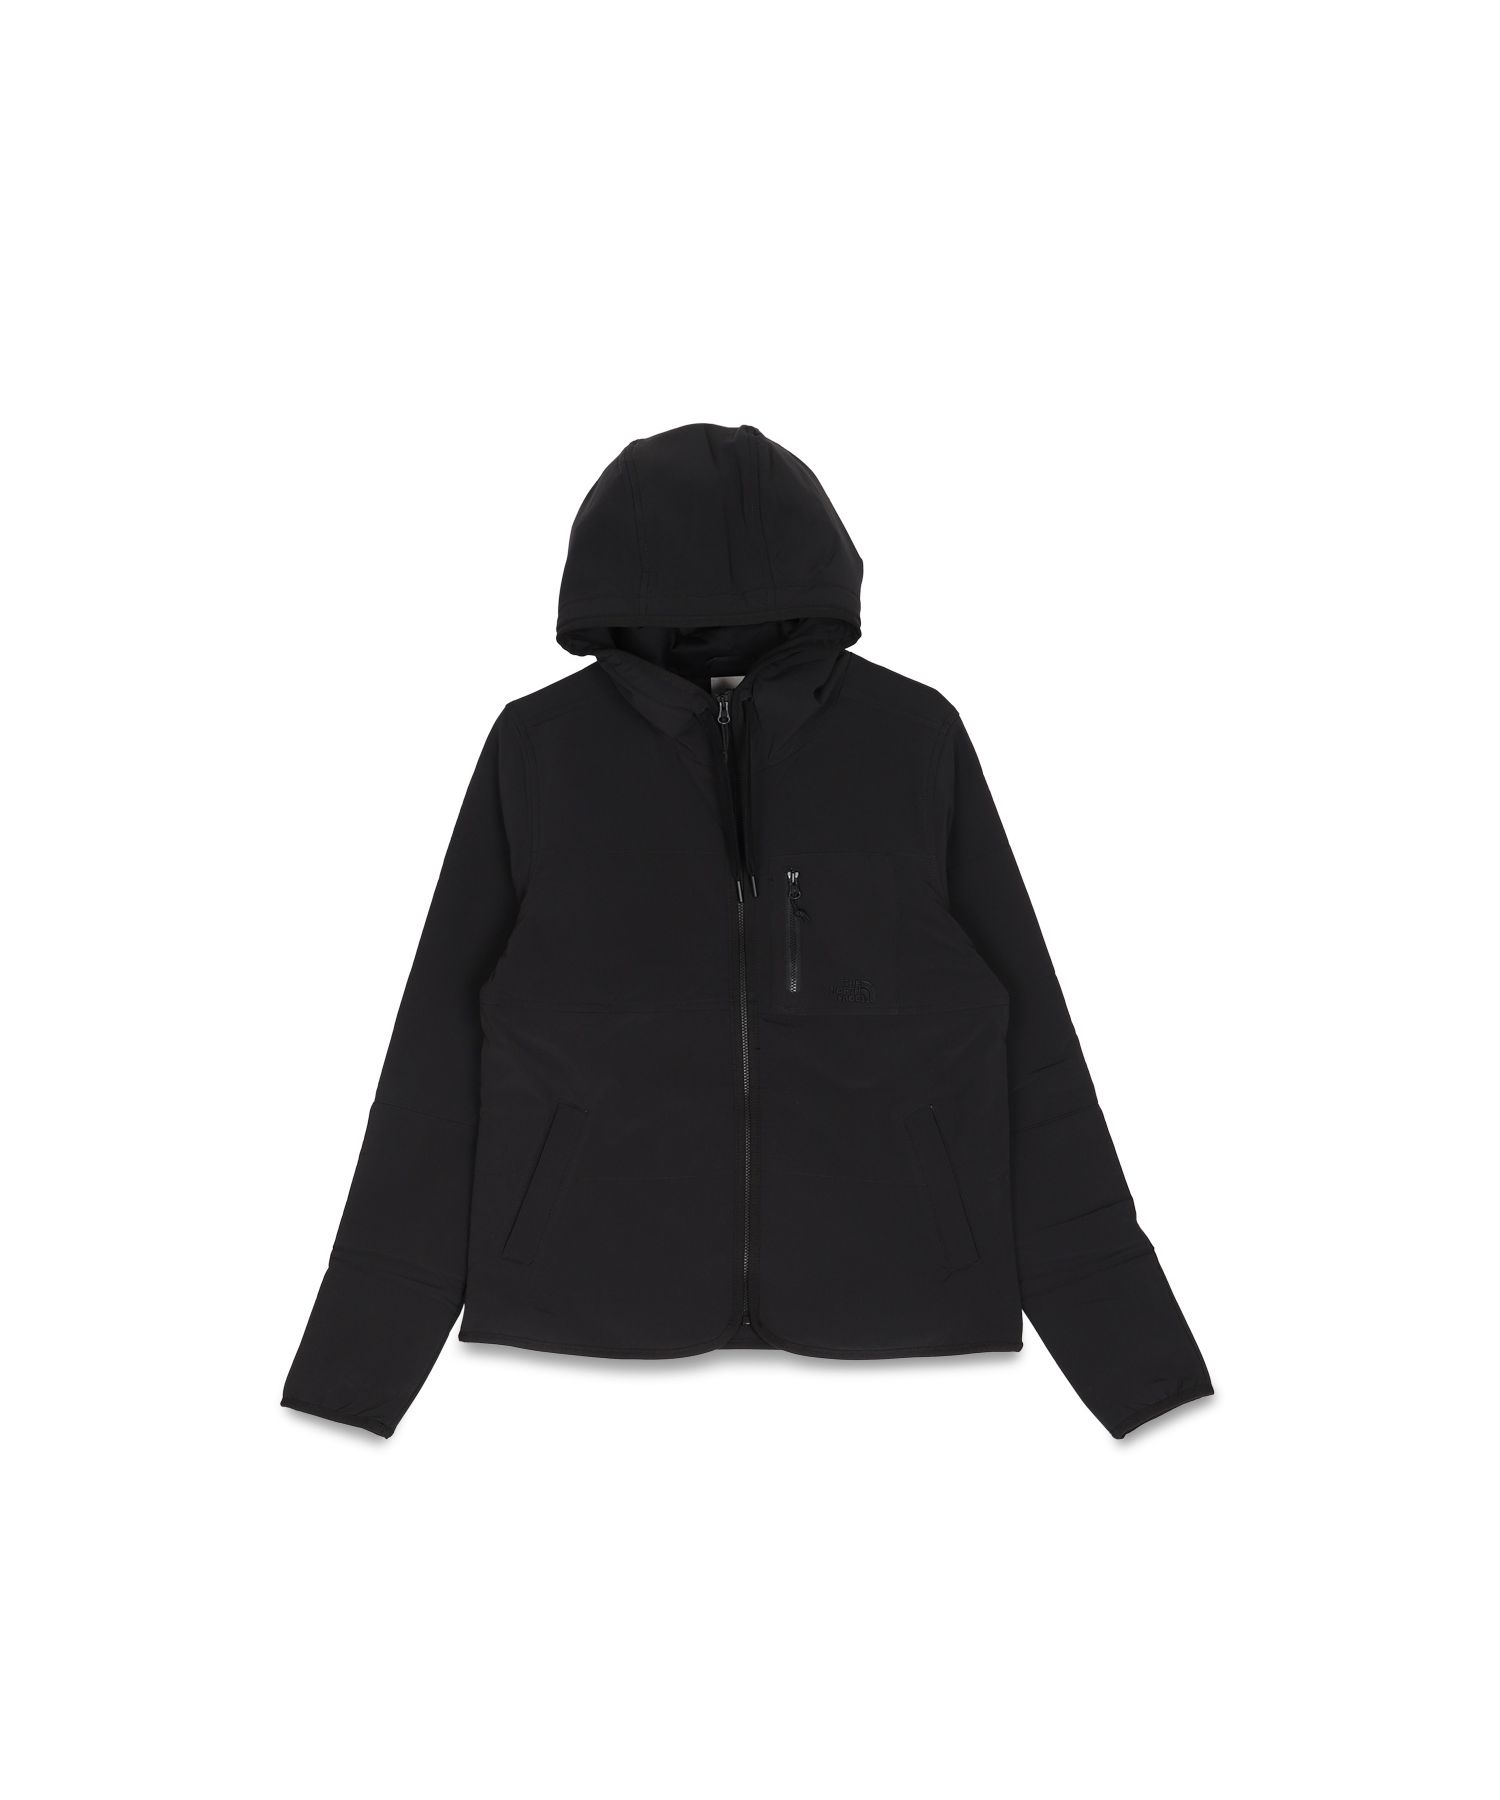 THE NORTH FACE【XL】レディース 黒パーカー